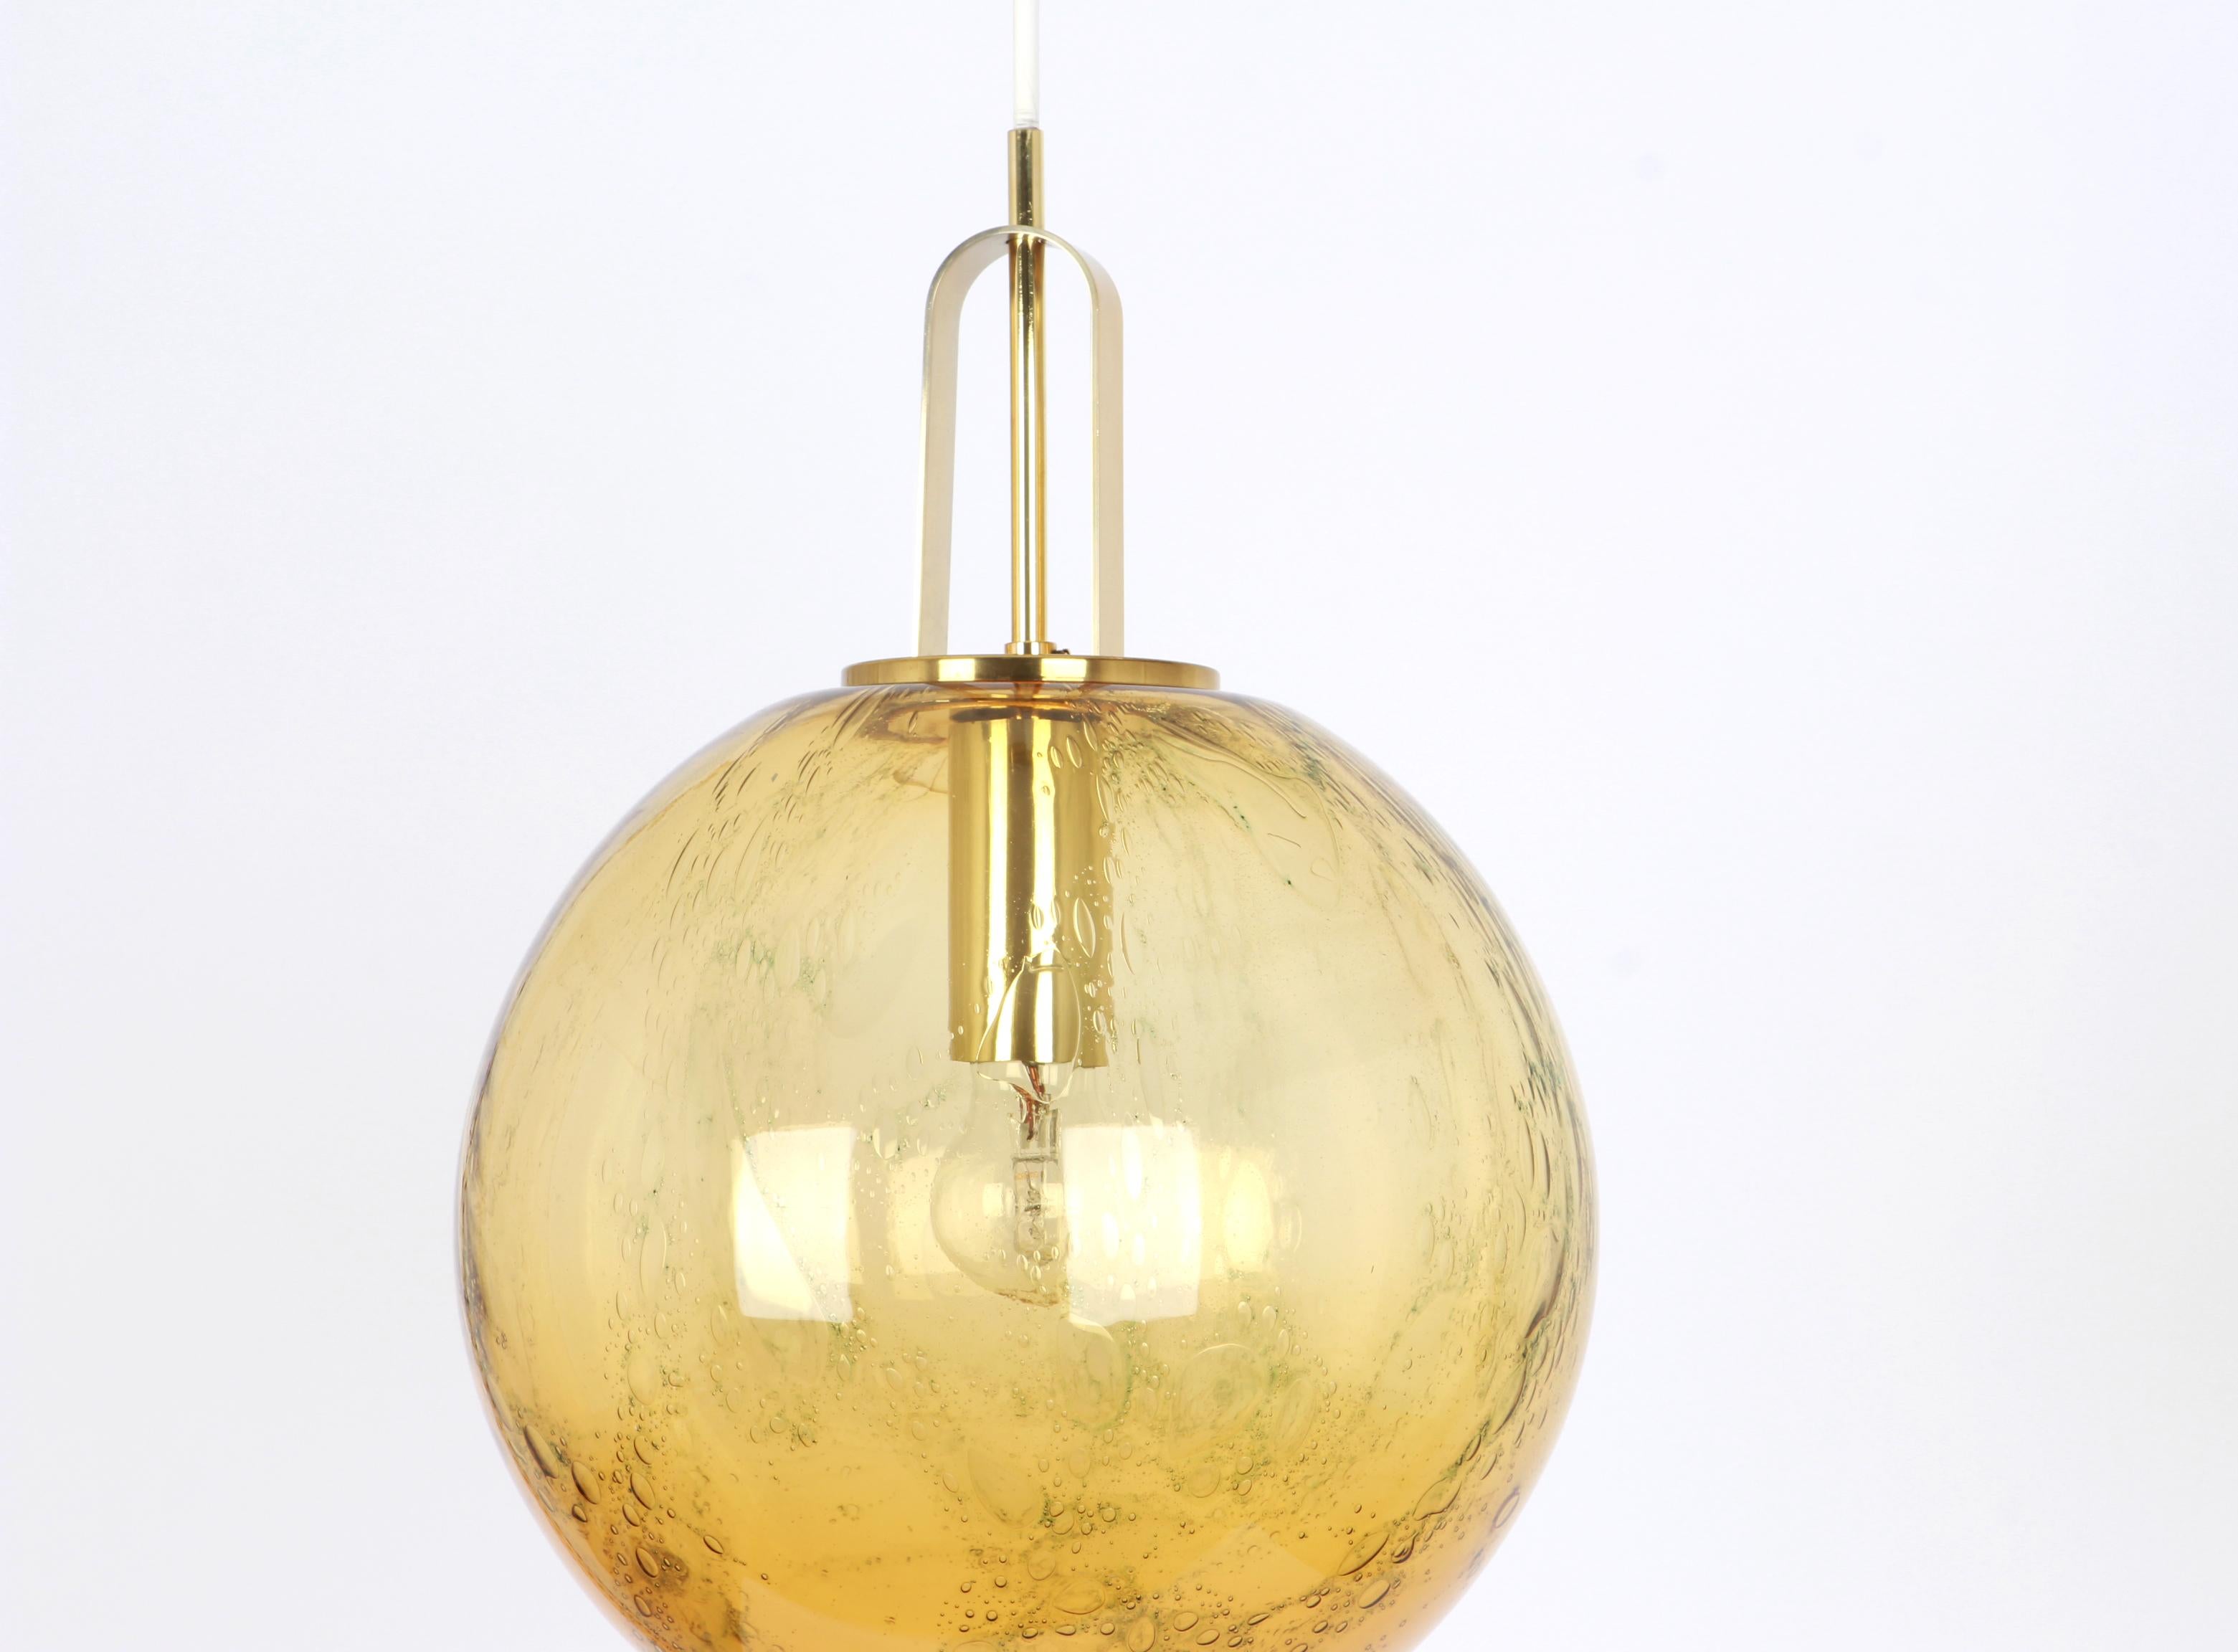 Ceiling light with large volcanic murano glass dome with a brass frame made by Doira, Germany.
Wonderful light effect.
High quality and in very good condition. Cleaned, well-wired and ready to use. 
The fixture requires 1 x E27 Standard bulbs